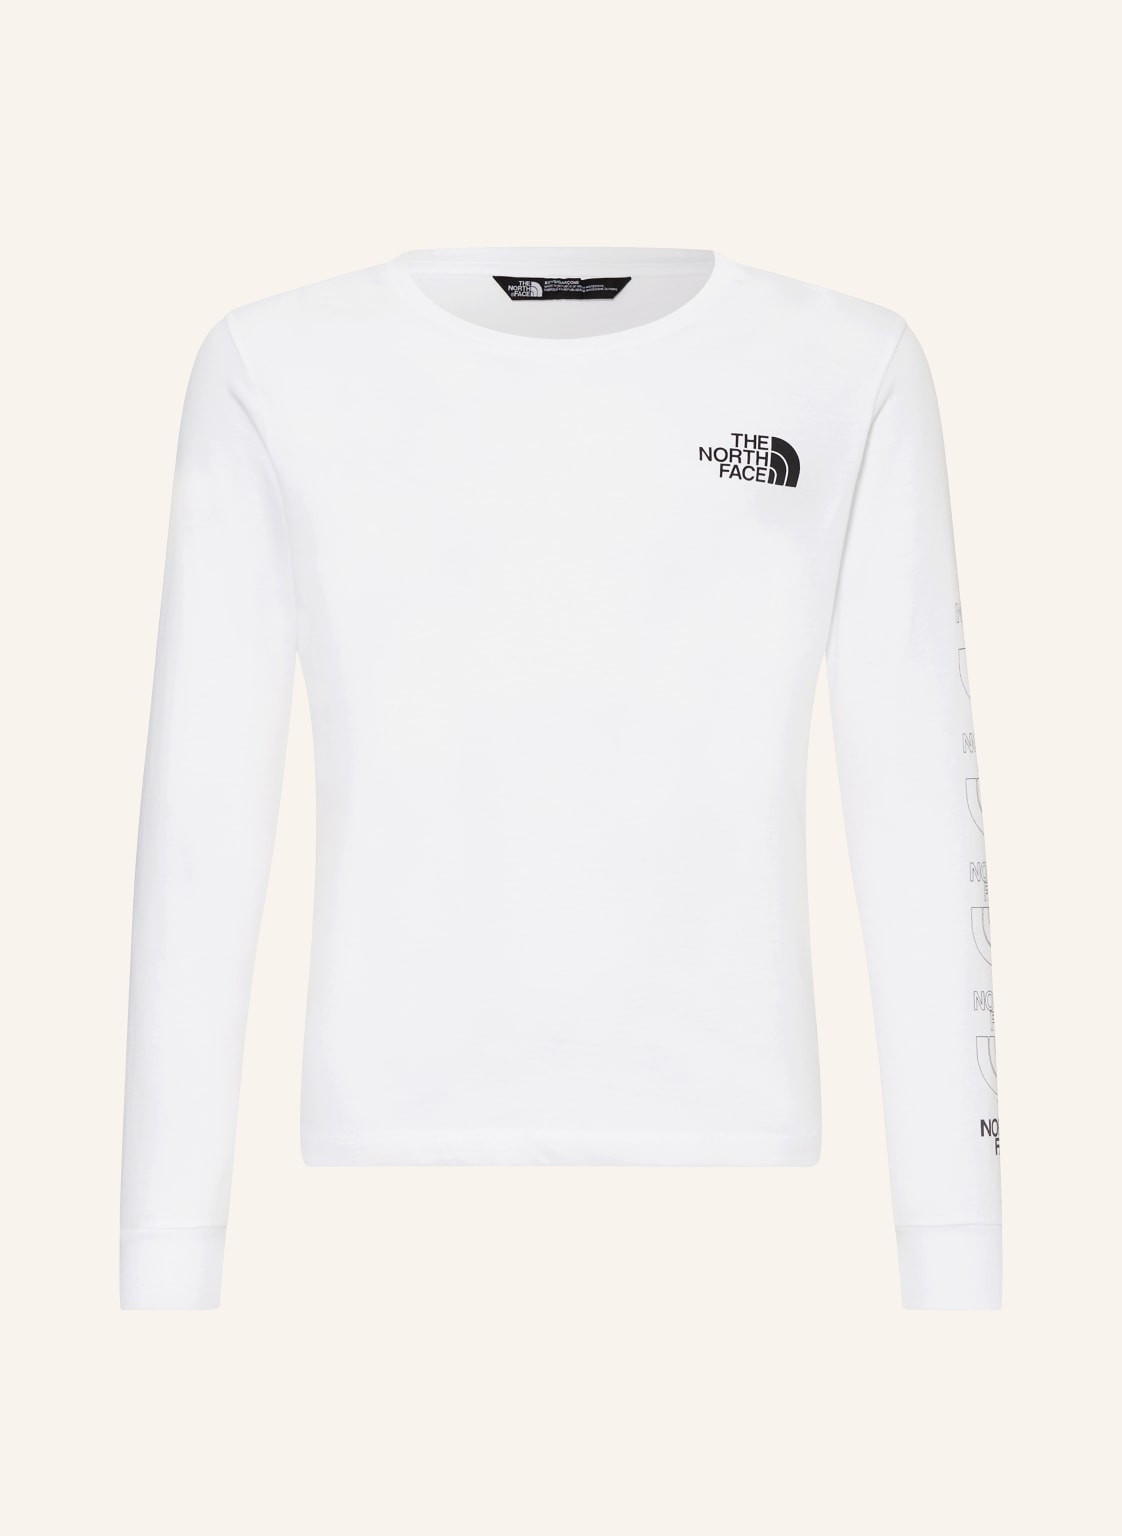 The North Face Longsleeve weiss von The North Face